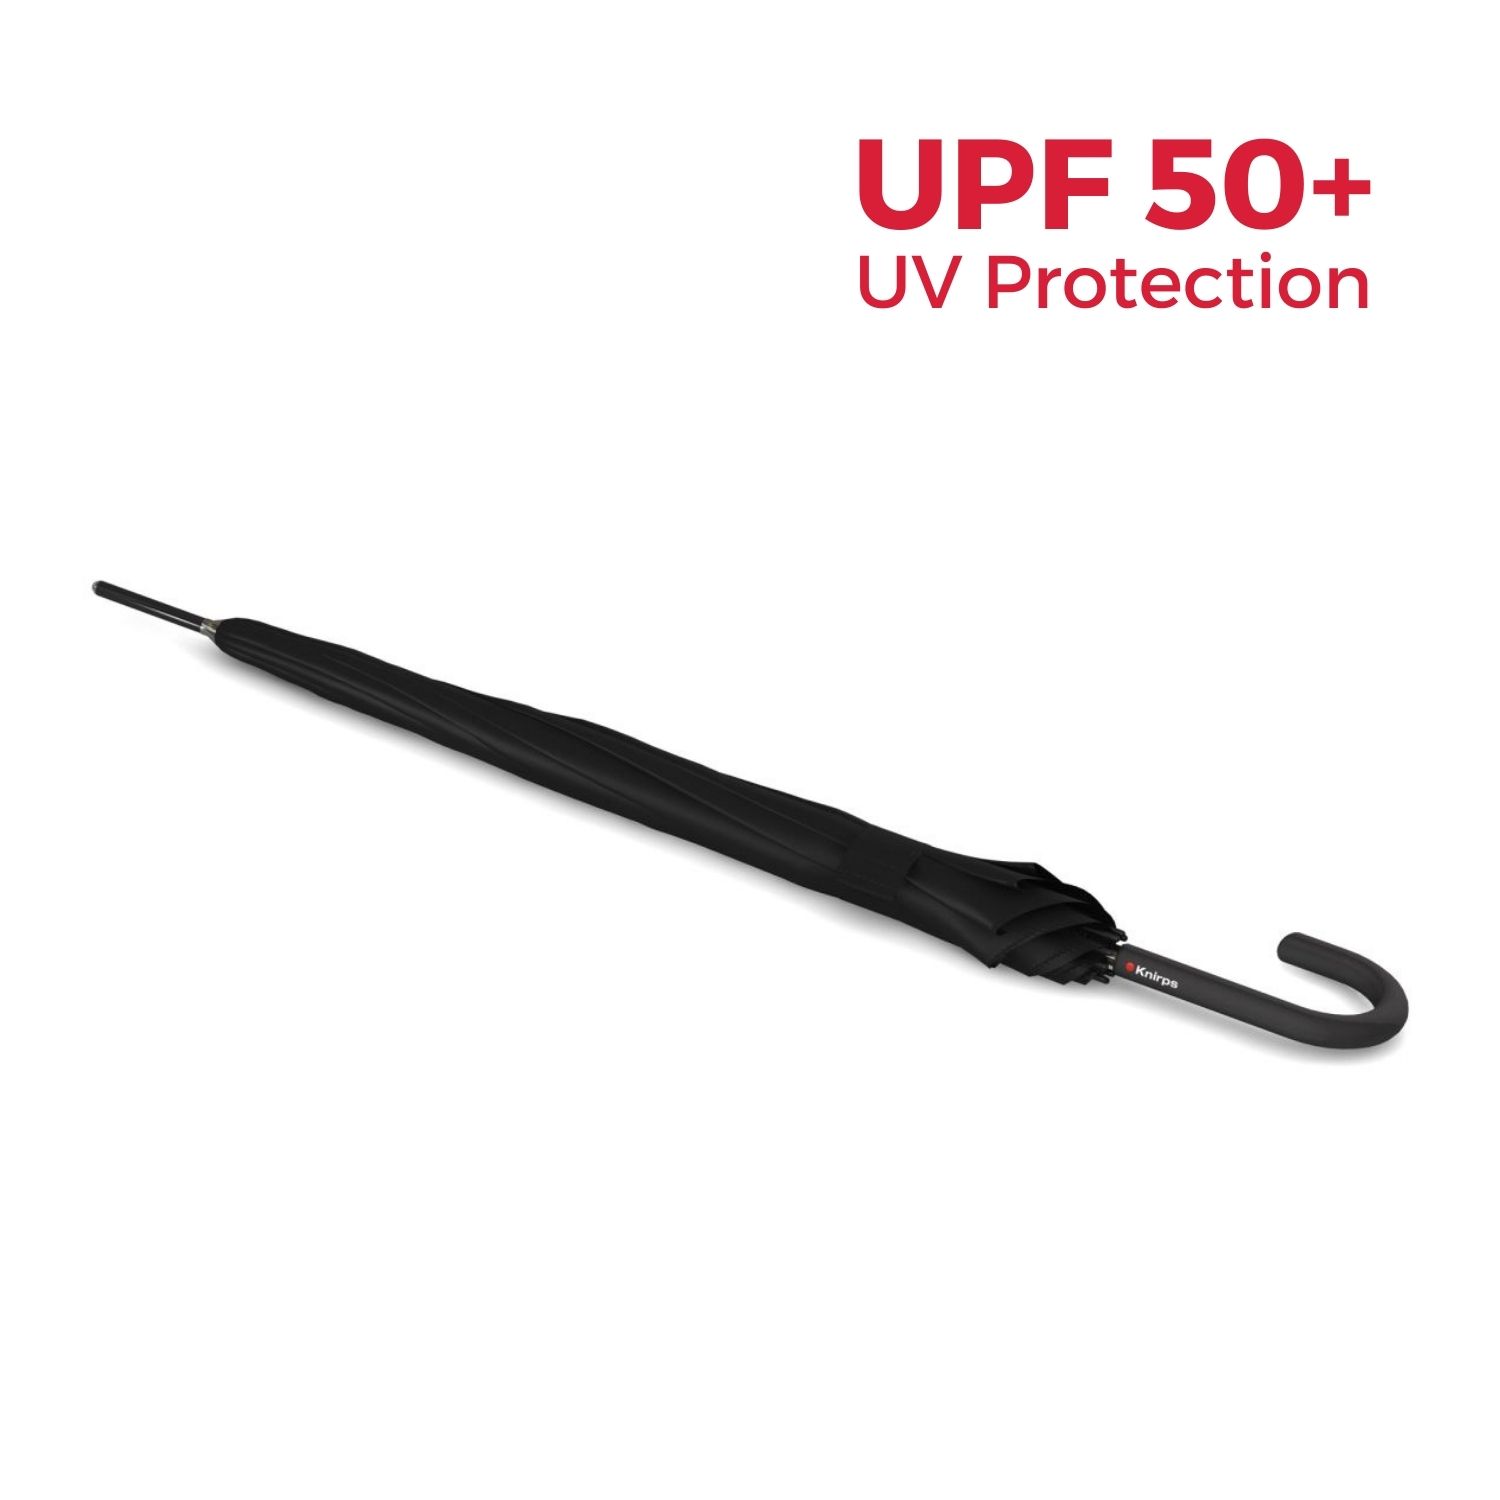 Planet Buy The Malaysia (UV - Knirps Traveller T.760 MY Protection) Stick Automatic Umbrella - in Black